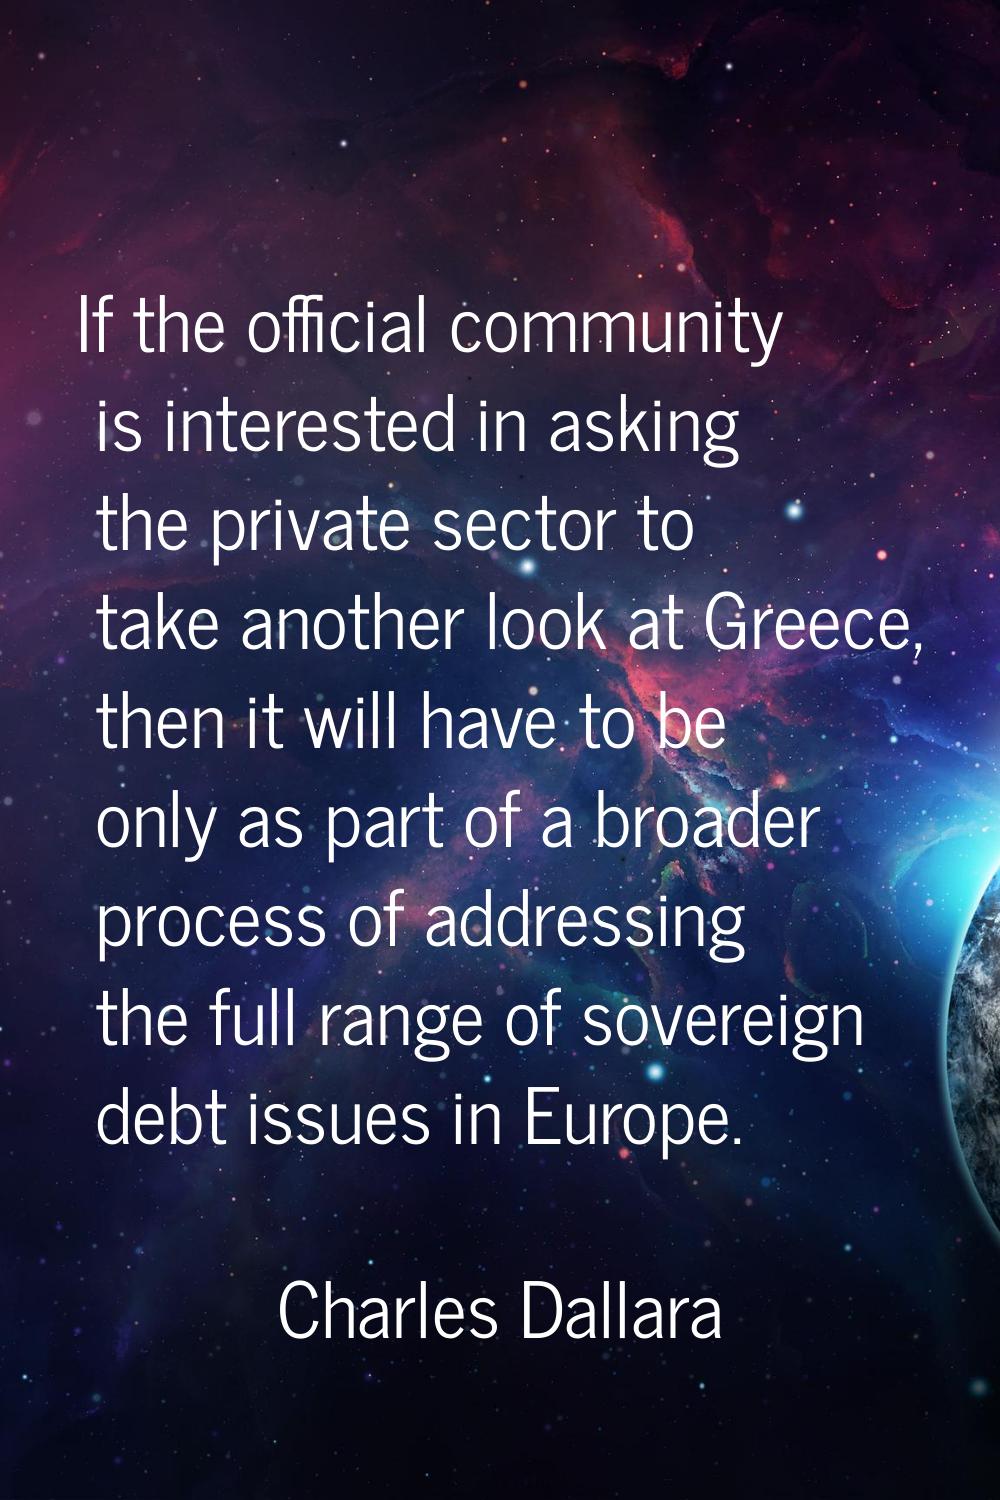 If the official community is interested in asking the private sector to take another look at Greece